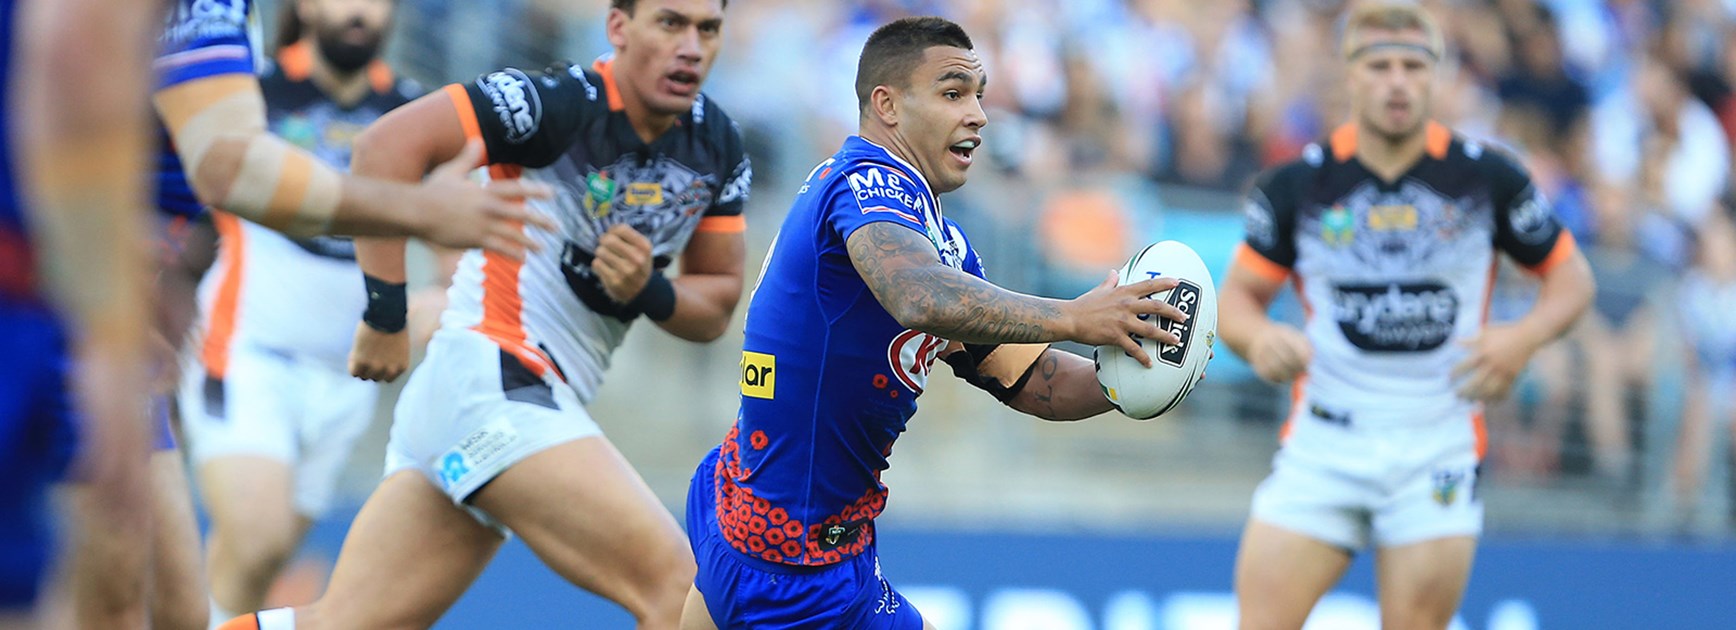 Bulldogs hooker Michael Lichaa in action against Wests Tigers in Round 8 of the Telstra Premiership.